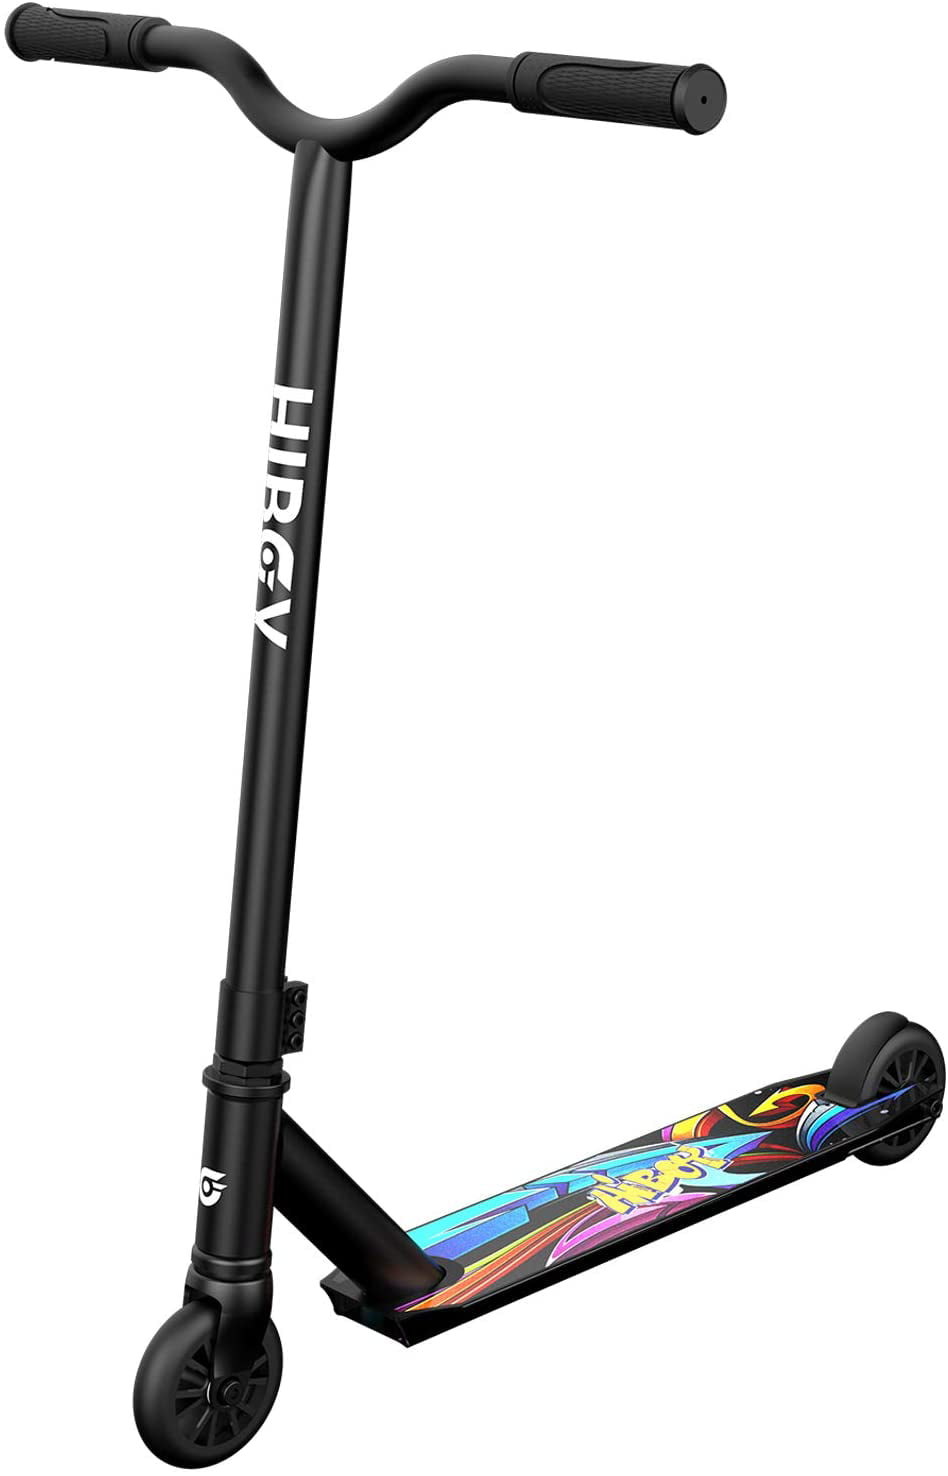 New Stunt Park Pro Scooter Commuter for Kids Adult Kick Push Trick Ride Gifts S1 